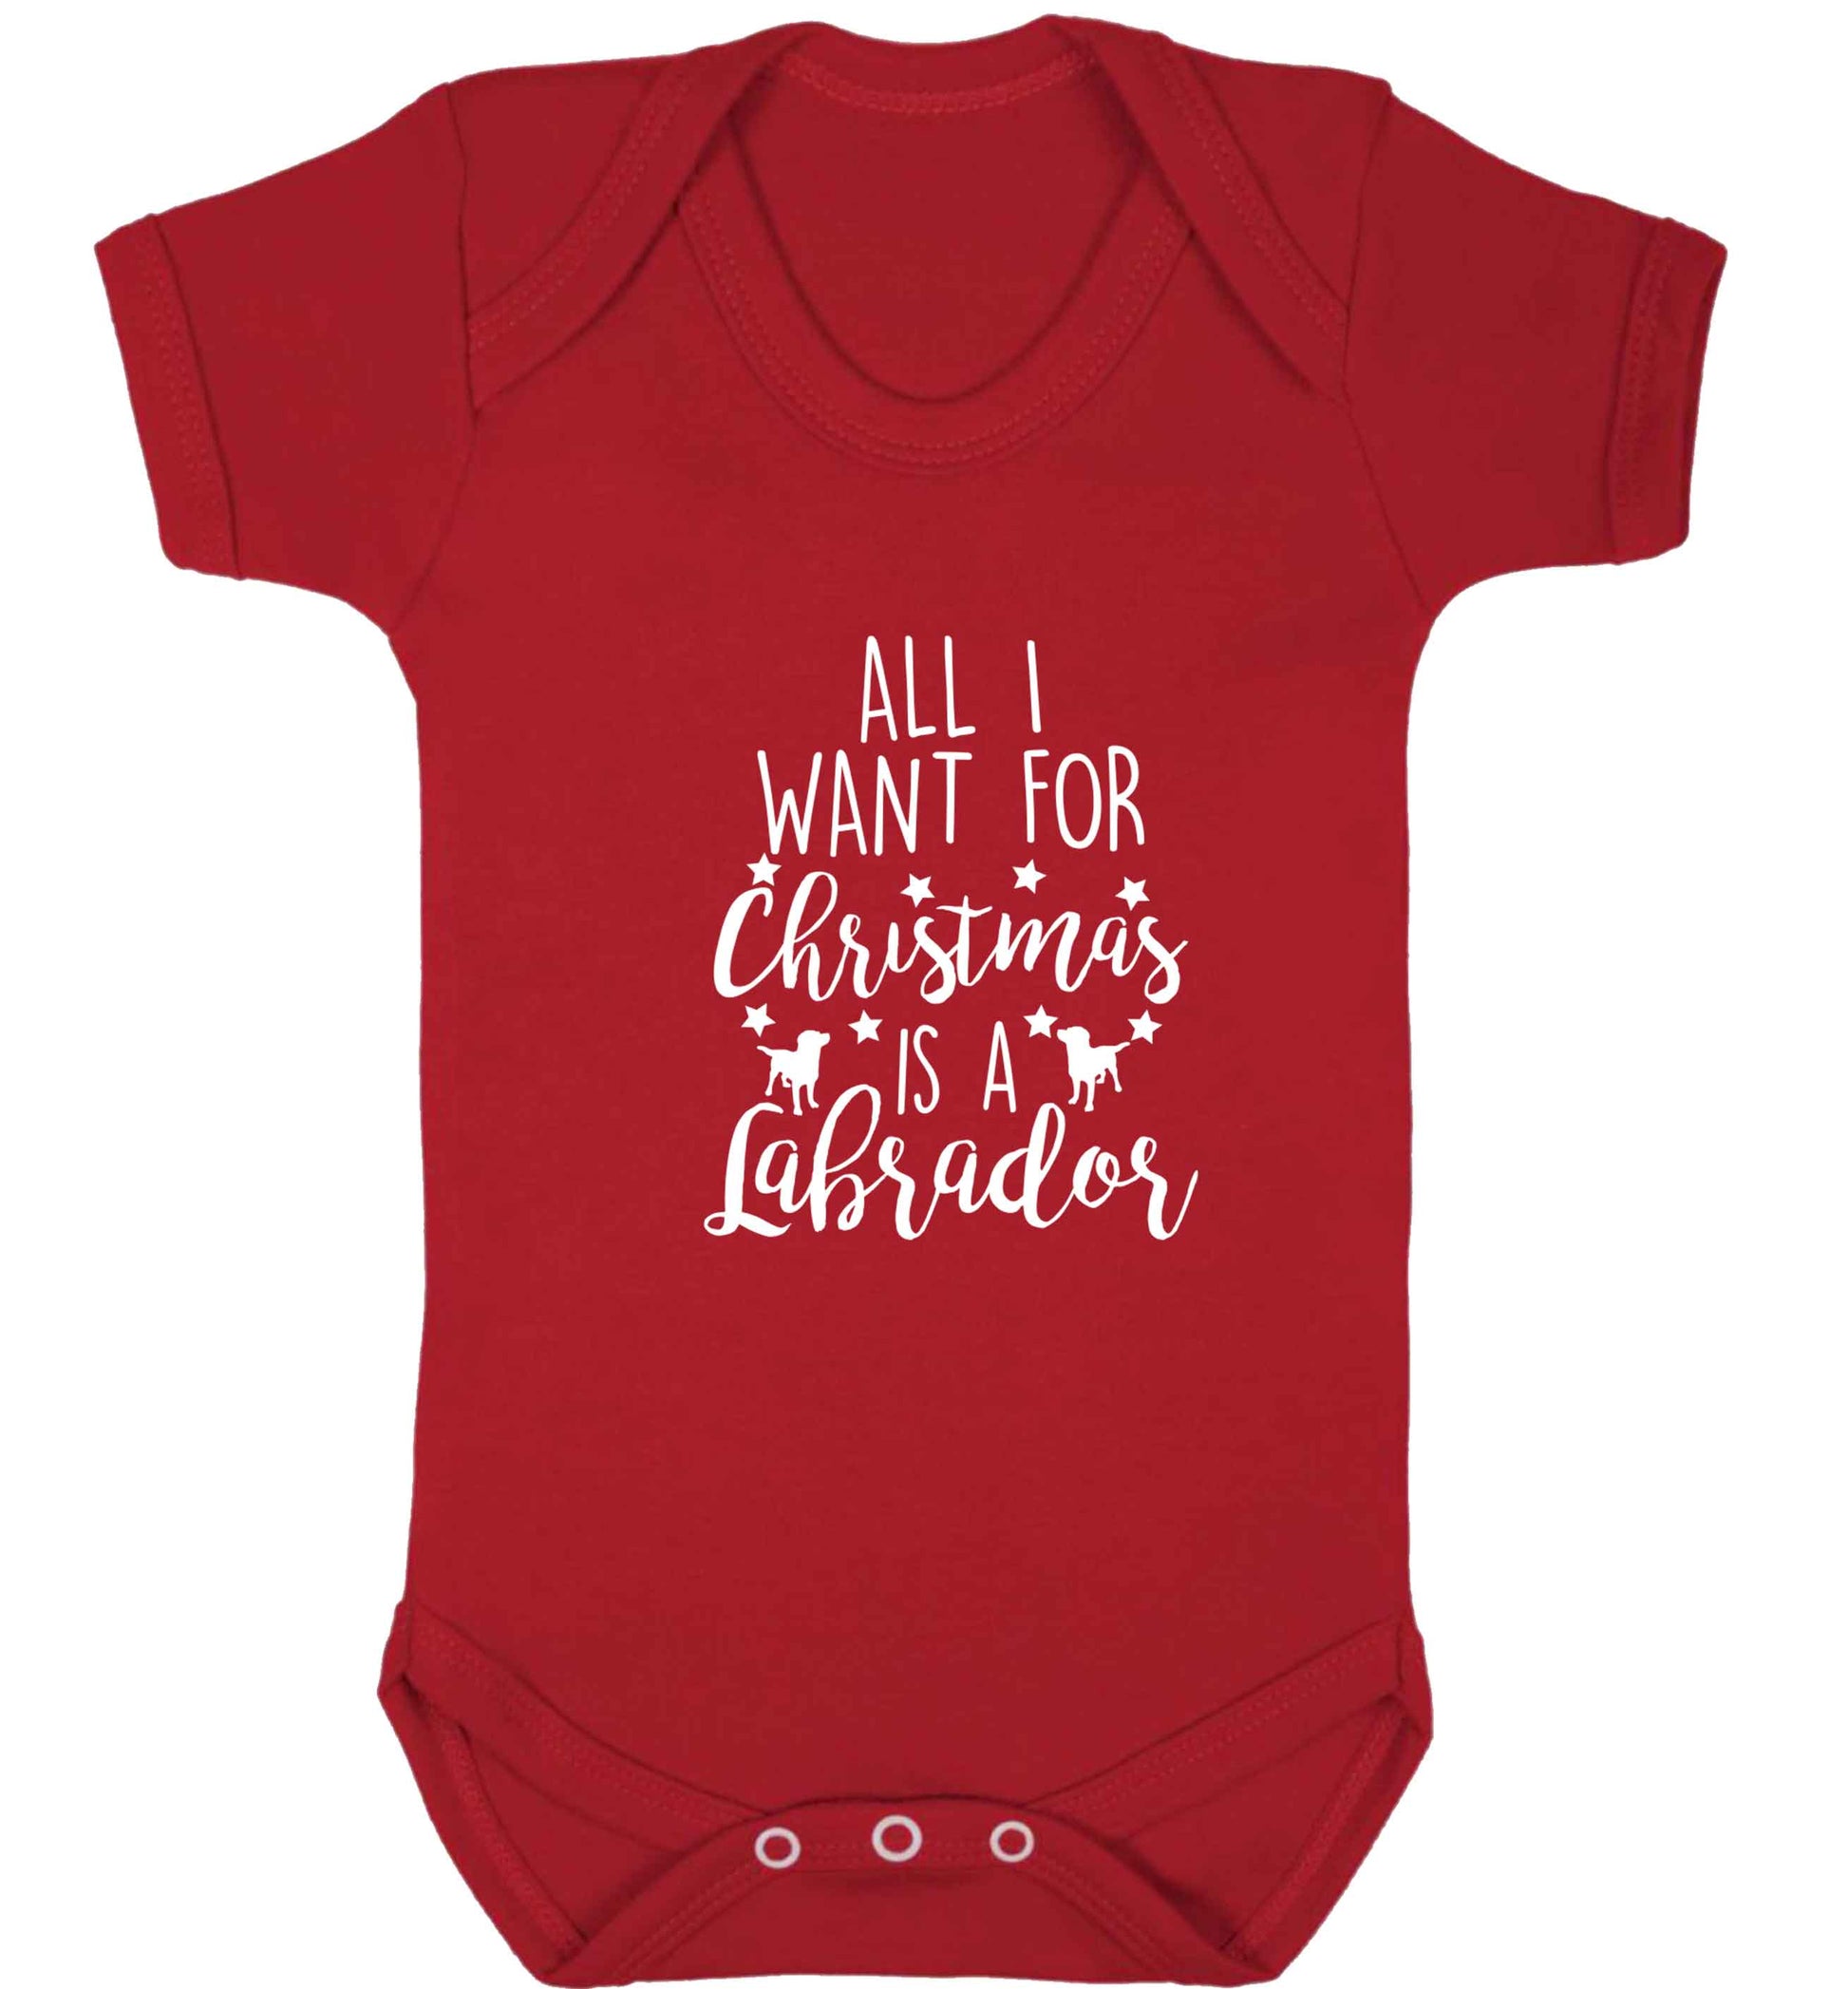 All I want for Christmas is a labrador baby vest red 18-24 months